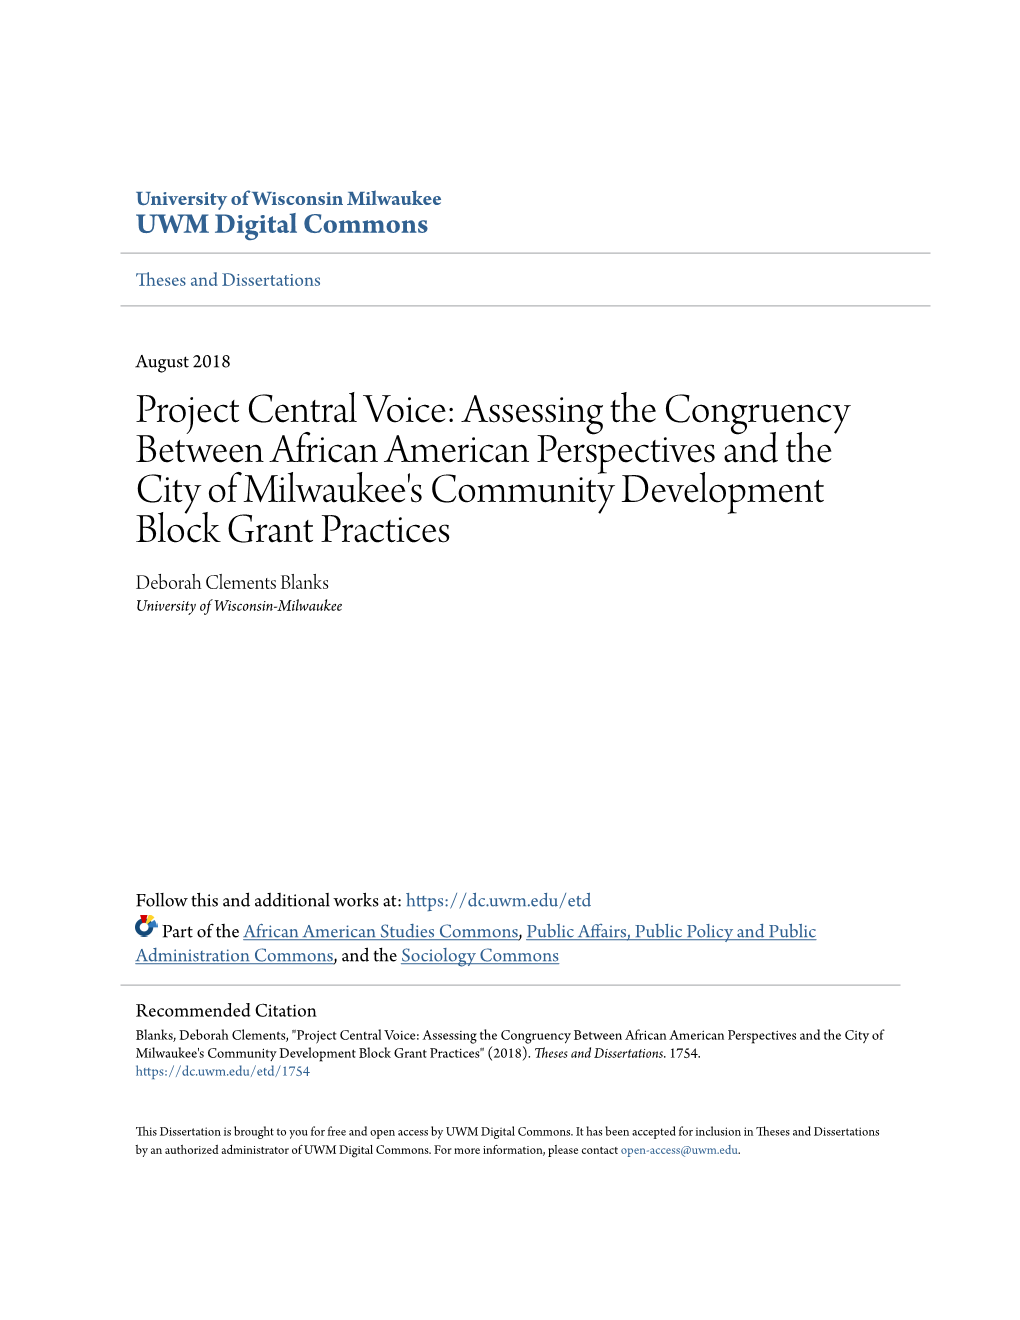 Project Central Voice: Assessing the Congruency Between African American Perspectives and the City of Milwaukee's Community